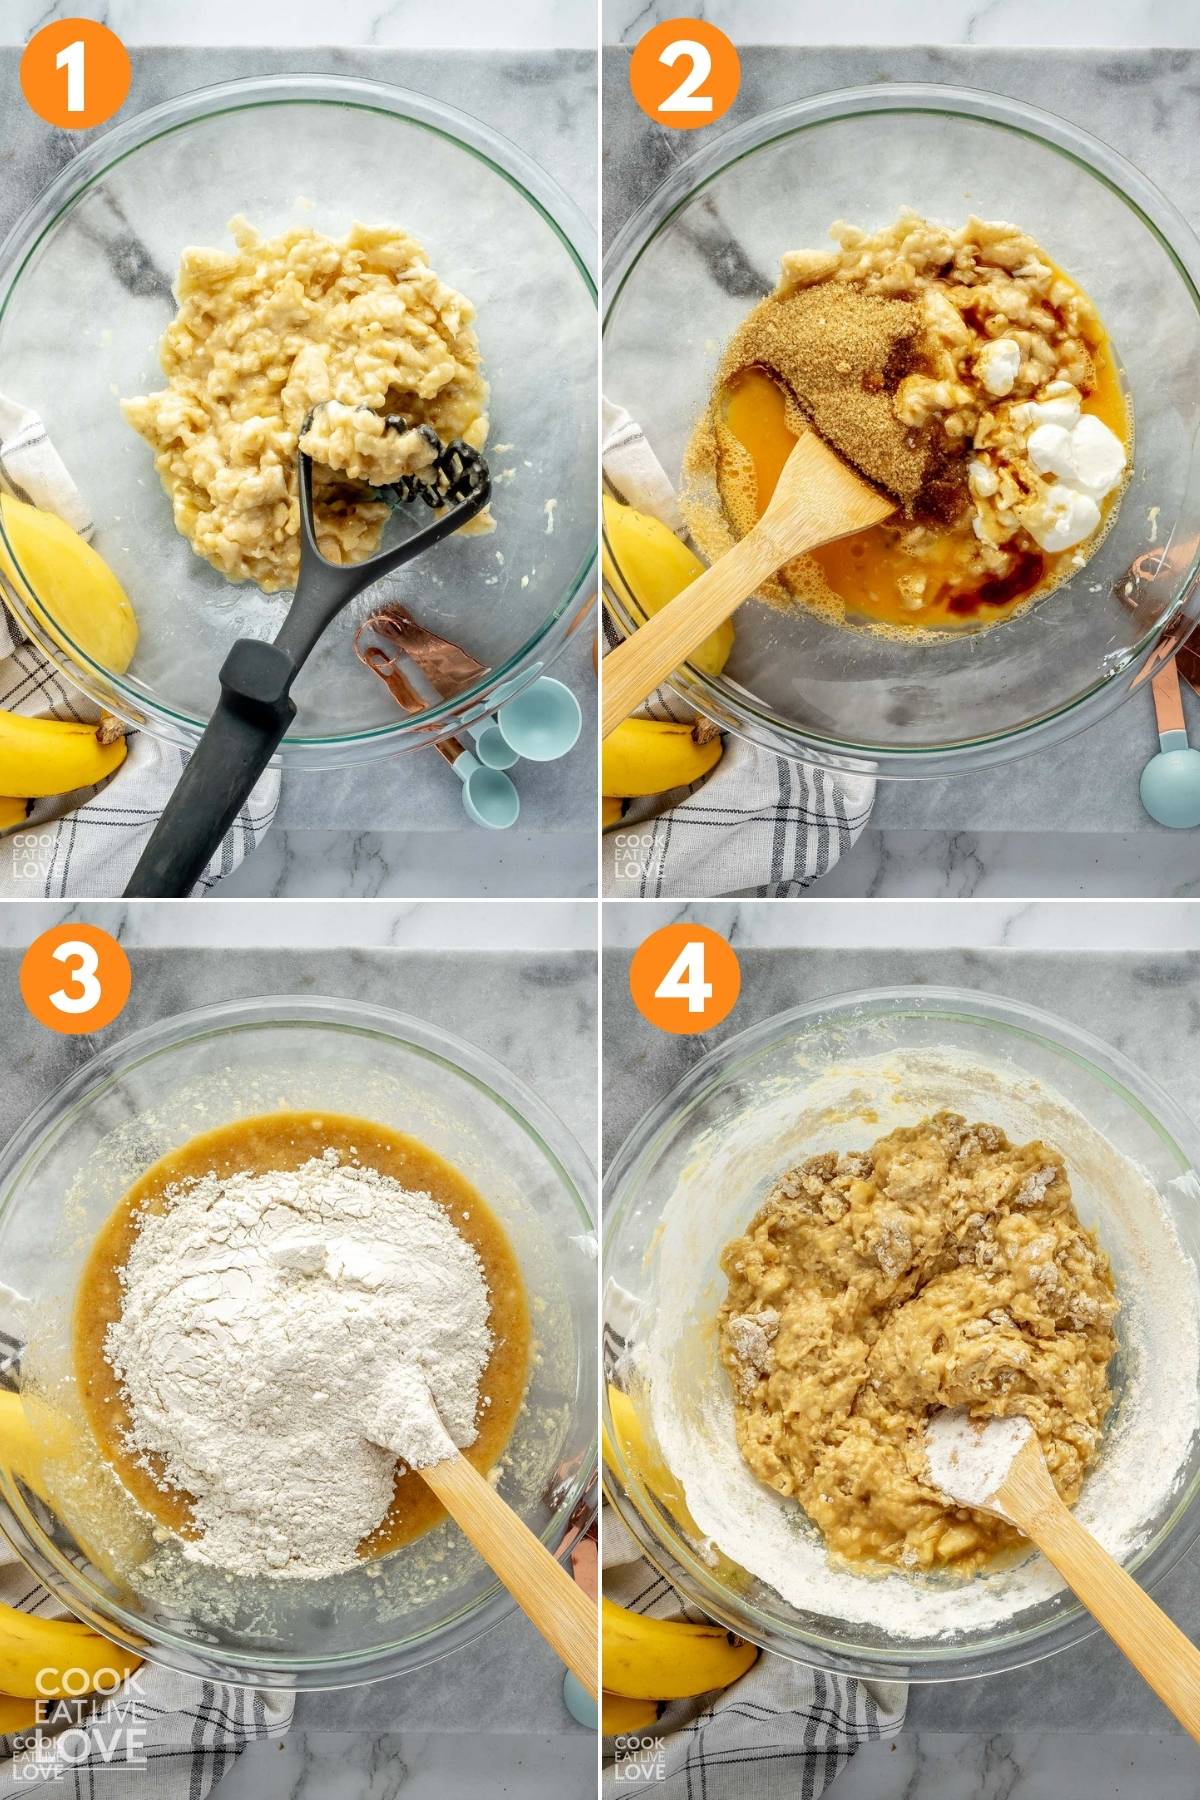 Collage of four images showing how to make the banana bread batter in a glass mixing bowl.